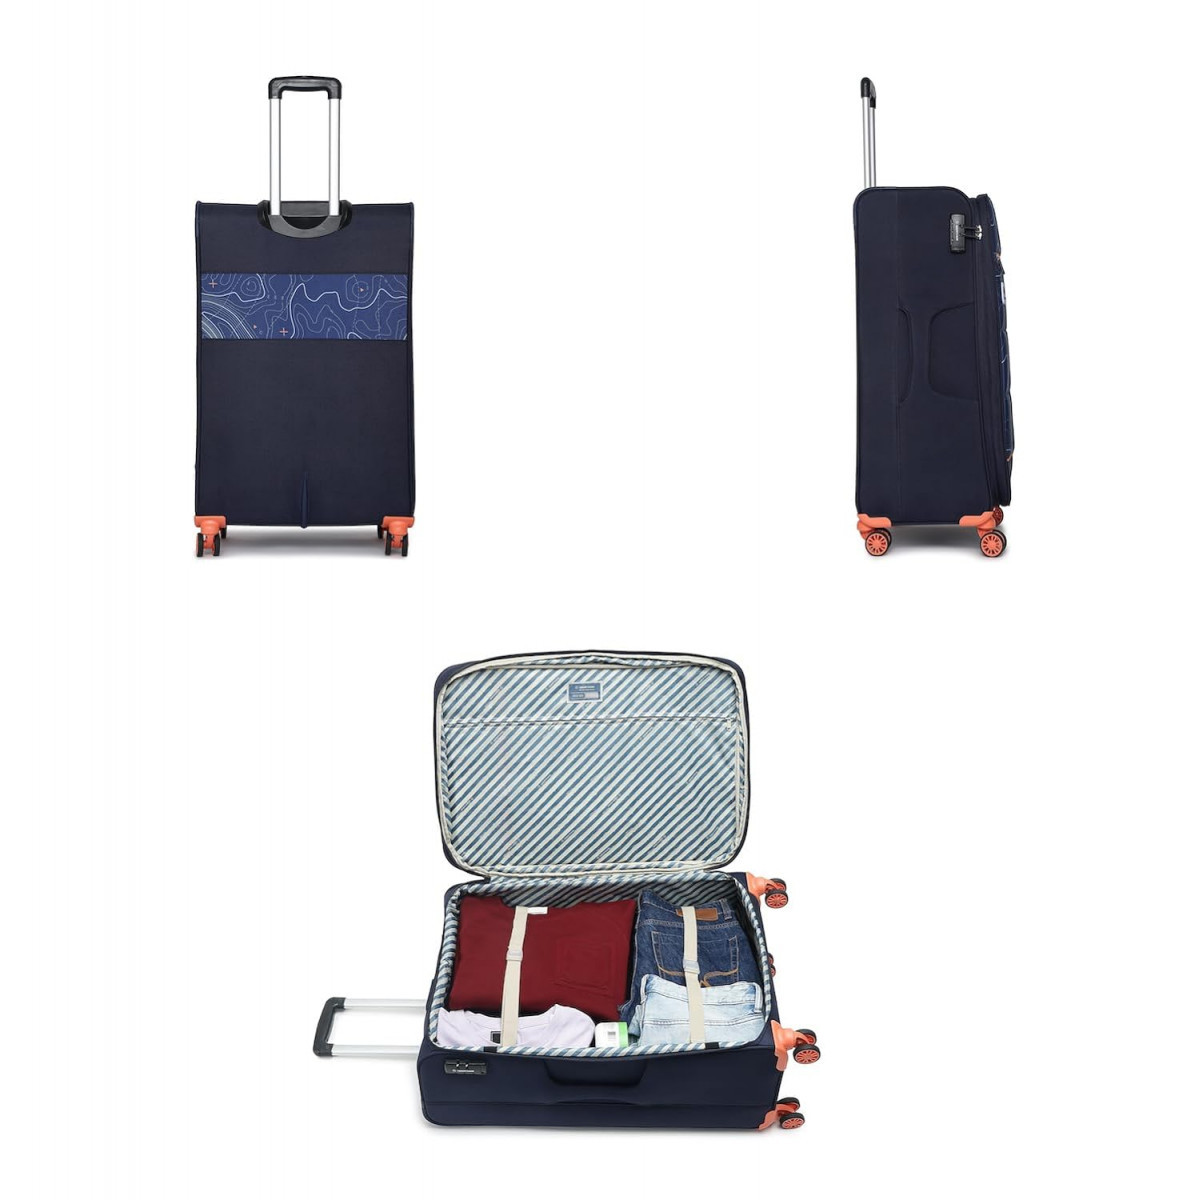 uppercase Topolite Trolley Bag Set Of 2 SL Sustainable Cabin  Check-In Luggage Soft Printed Luggage Combination Lock 8 Wheel Suitcase  Women 2500 Days Warranty Blue Polyester Spinner